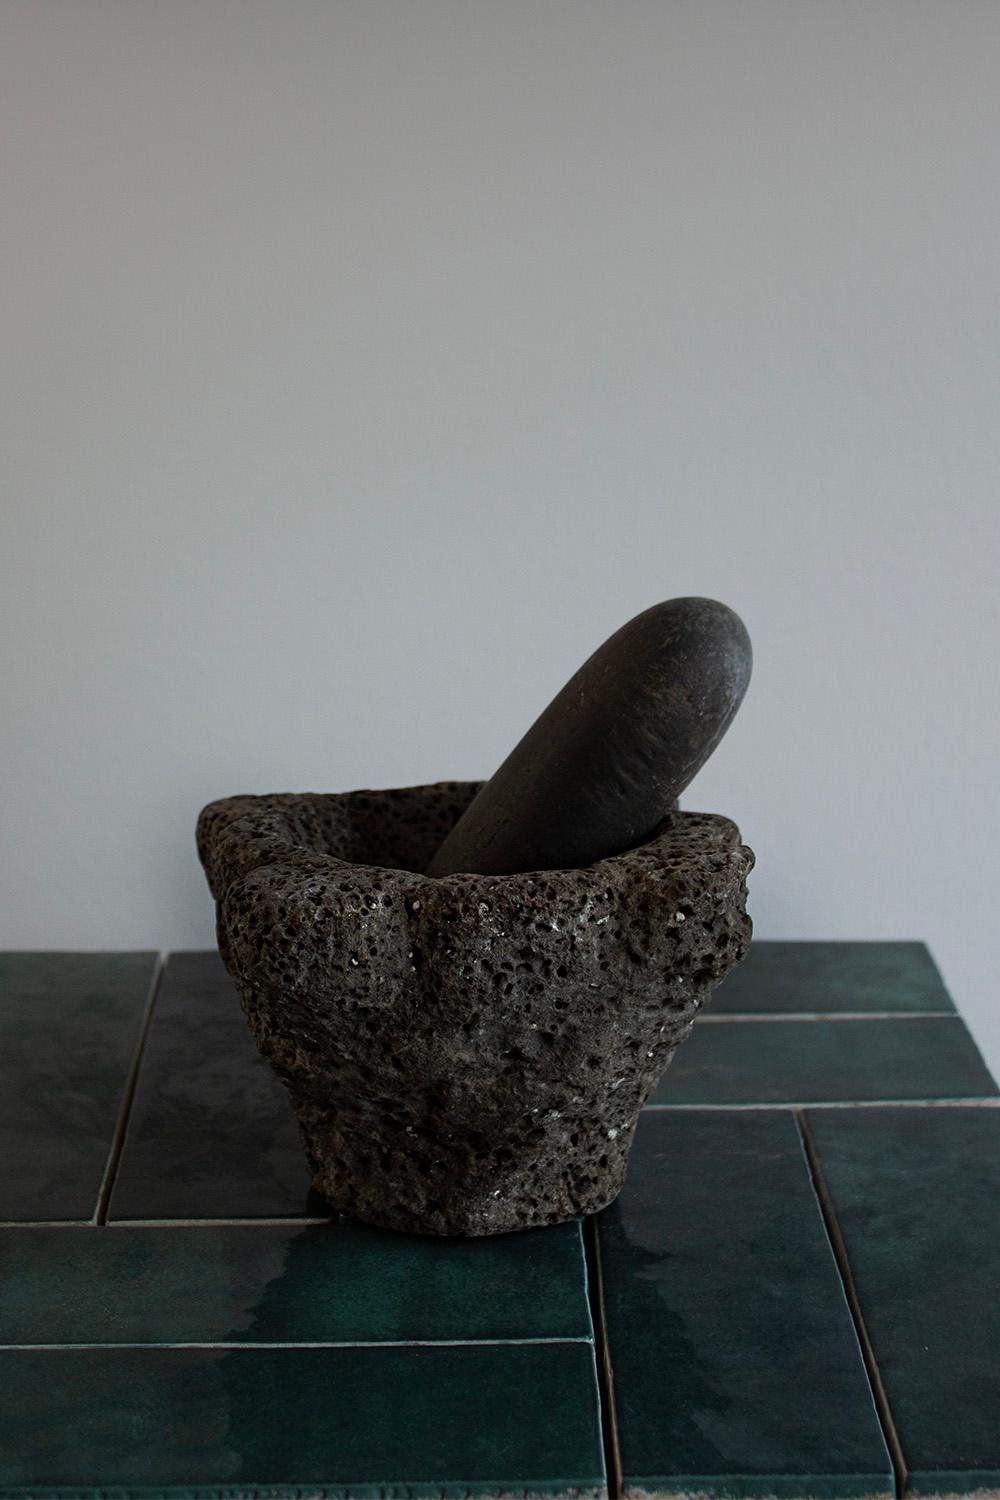 This small French mortar was sourced in the south of France. It's an iconic and traditional kitchen object which is found all over France. Its traditional use was and still is to grind seeds and herbs. 
This kitchen mortar will instantly add a touch